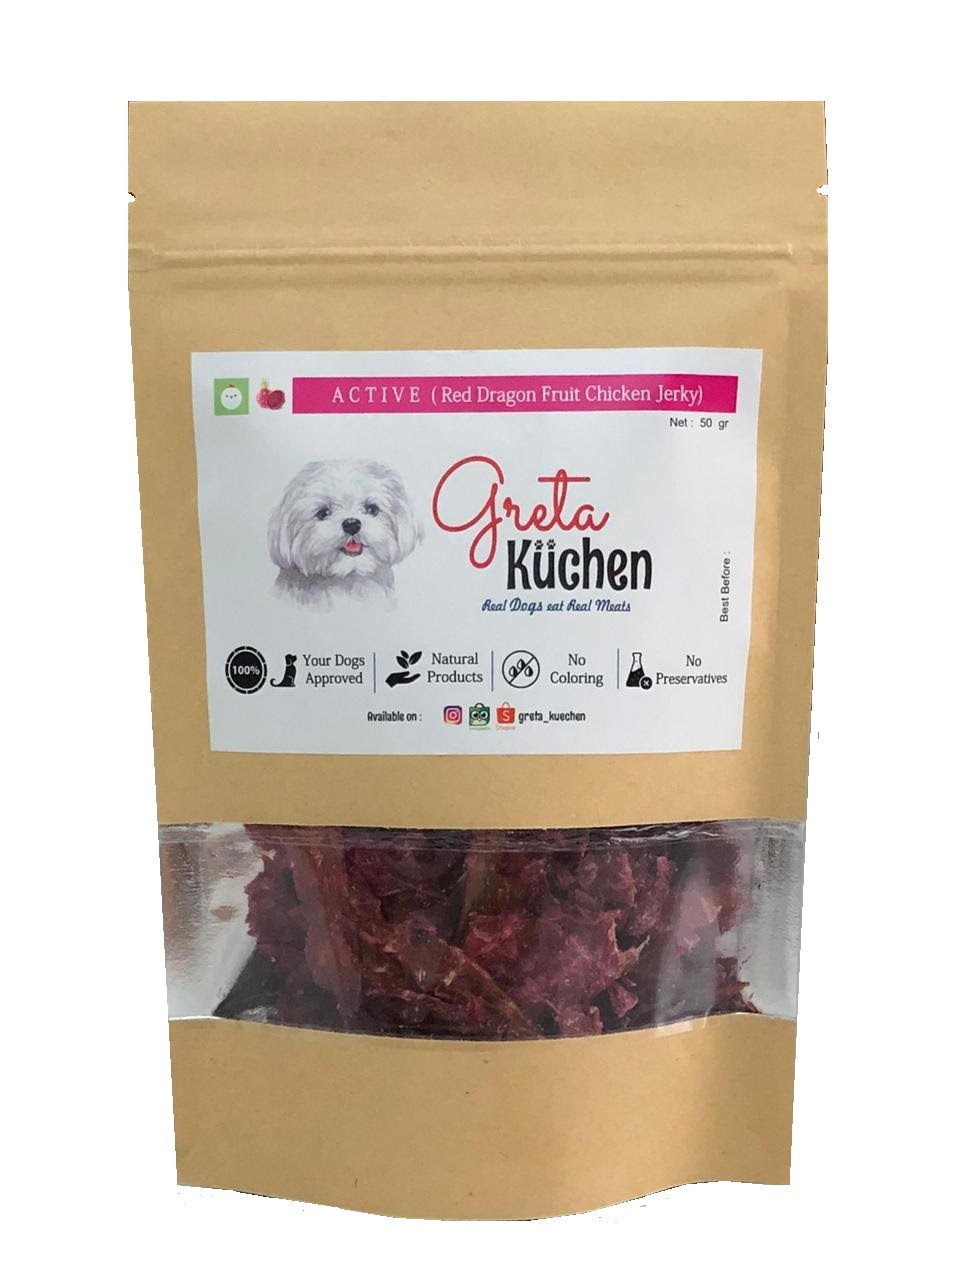 are dragon fruits good for dogs